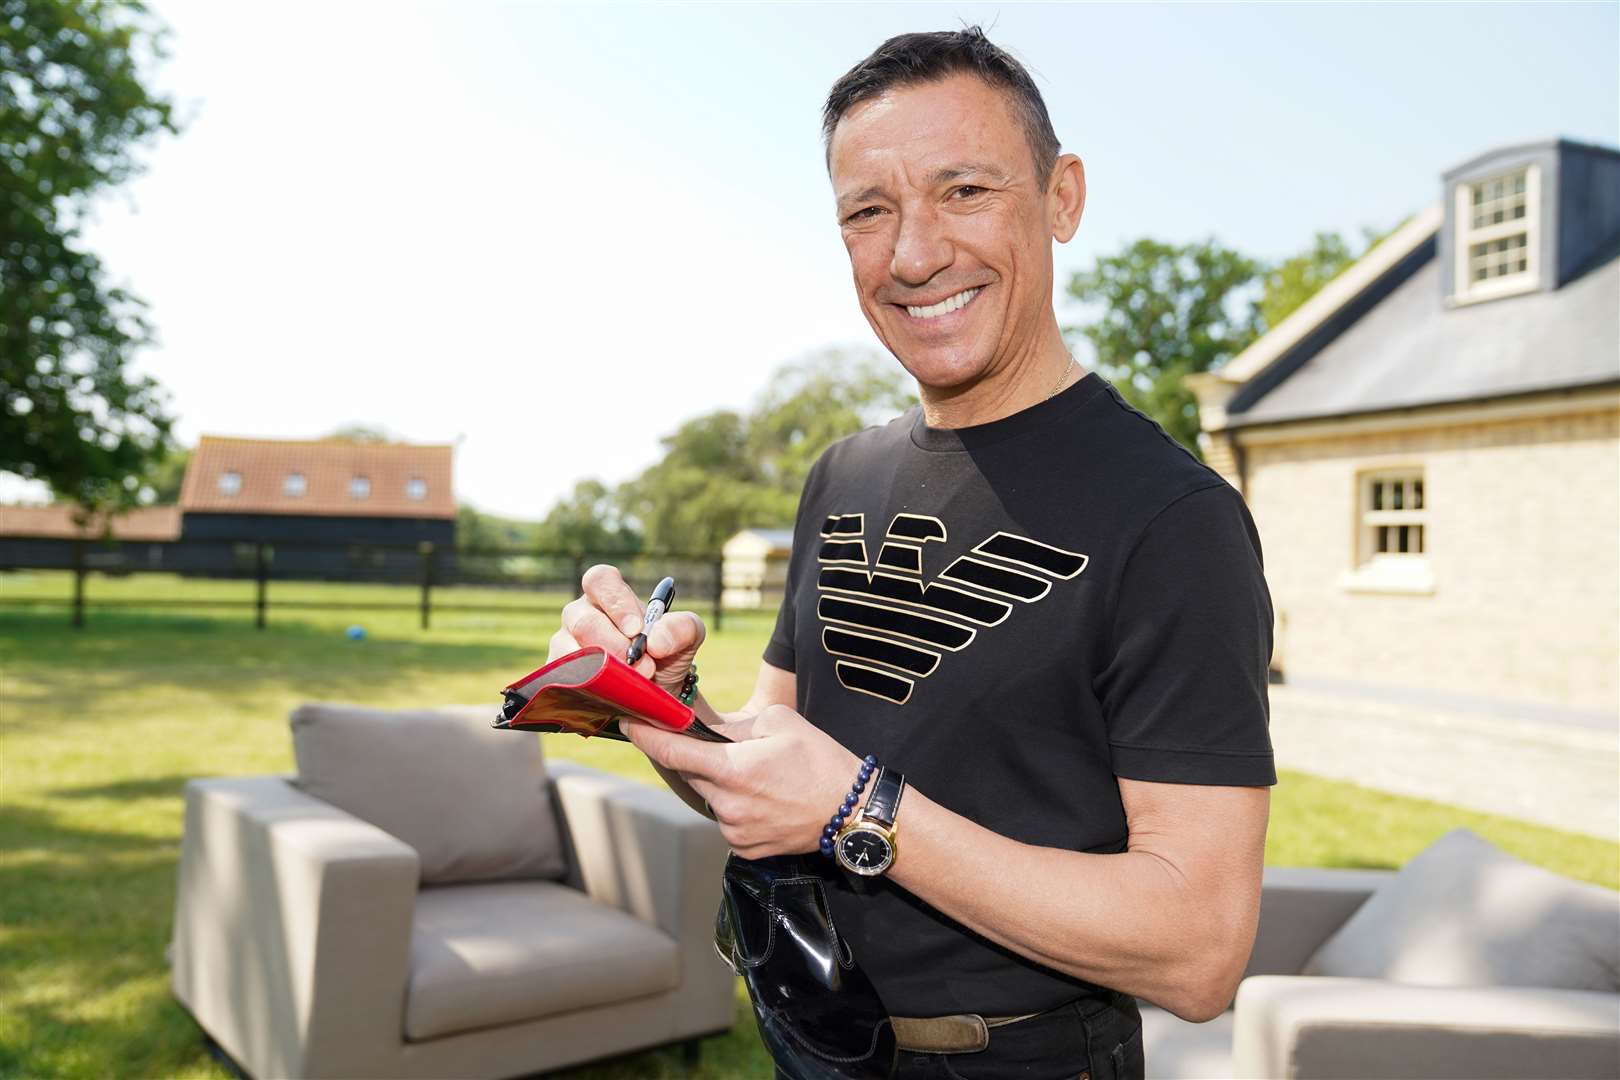 Frankie Dettori signs memorabilia at his home in Newmarket, Suffolk, ahead of the auction (Jacob King/PA)